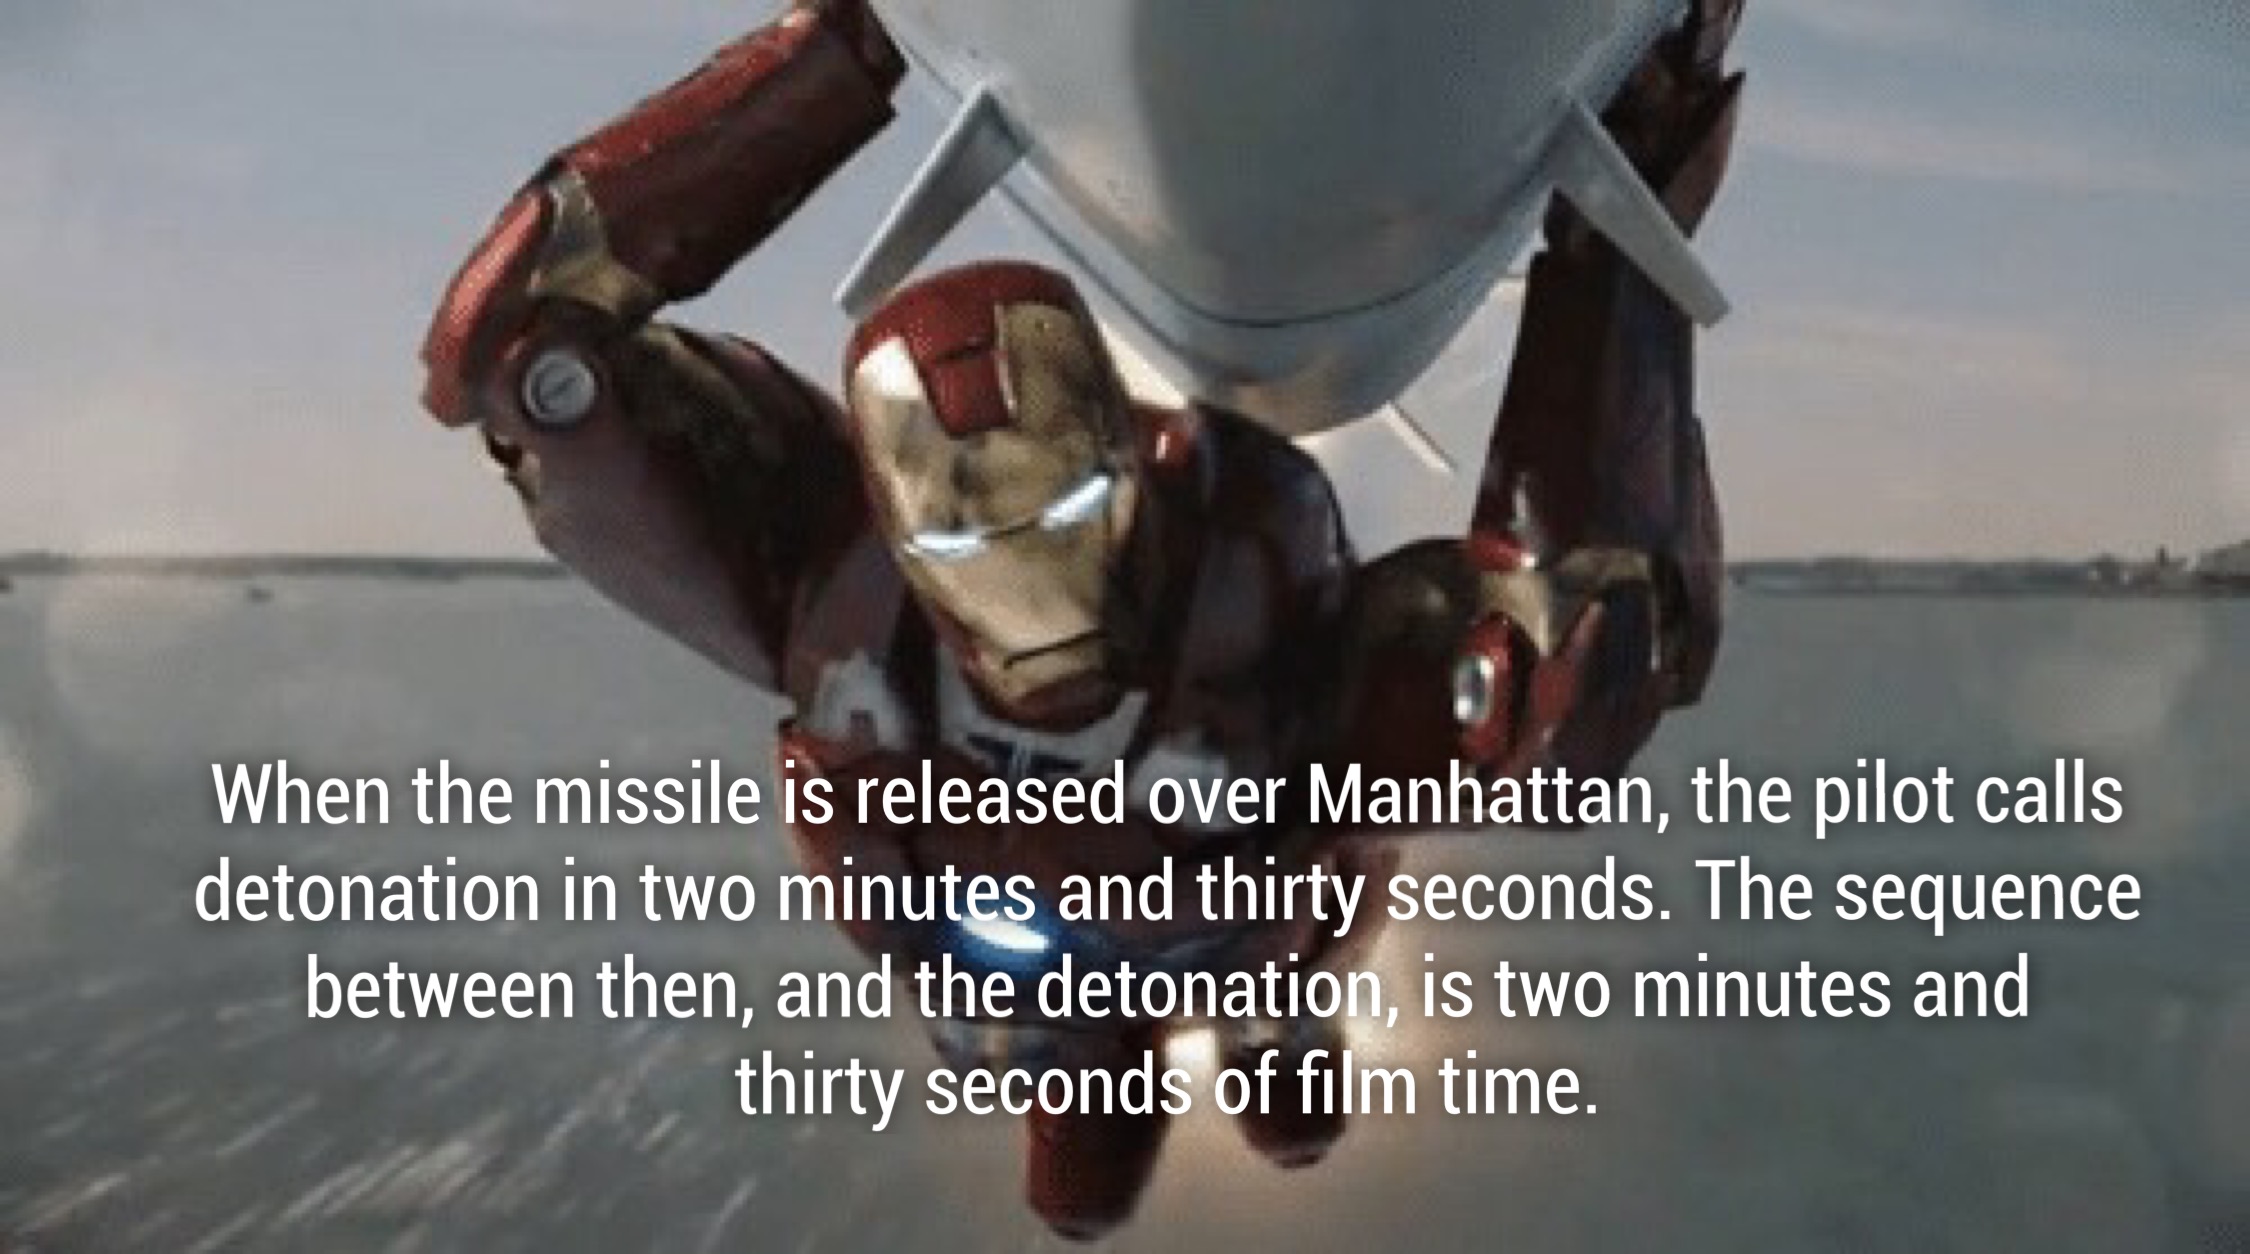 avengers missile - When the missile is released over Manhattan, the pilot calls detonation in two minutes and thirty seconds. The sequence between then, and the detonation, is two minutes and thirty seconds of film time.